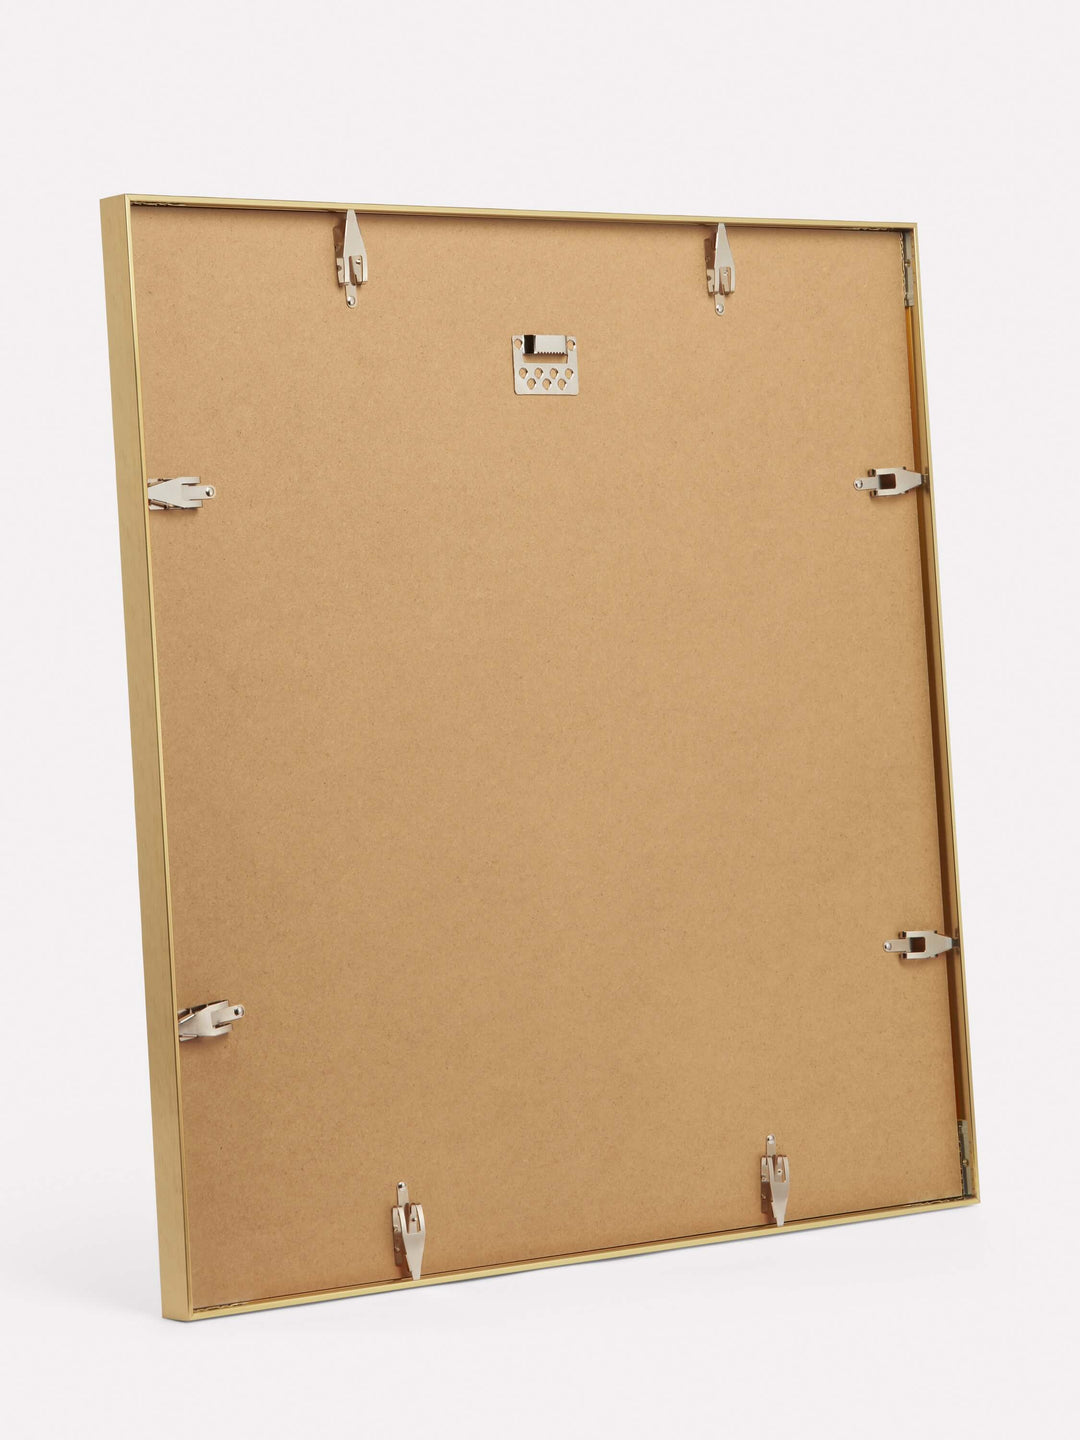 24x24-inch Thin Frame, Gold - Back view